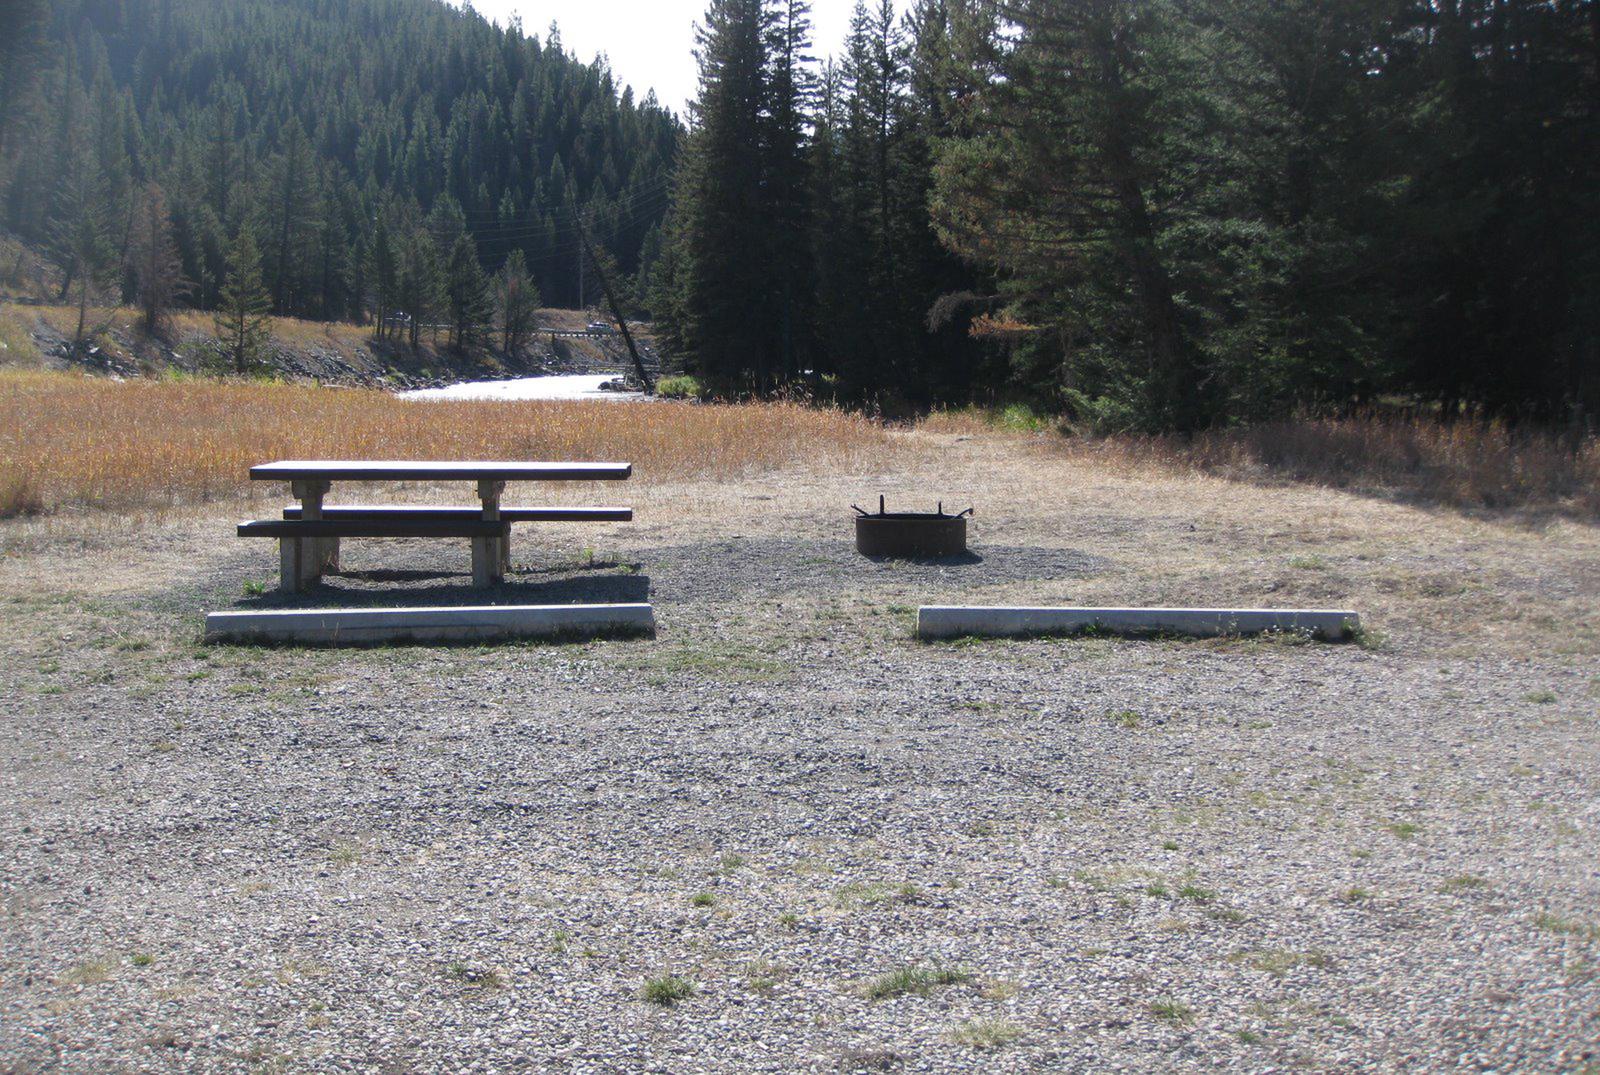 Site 10 campsite - pine trees along river, picnic table & fire ringSite 10